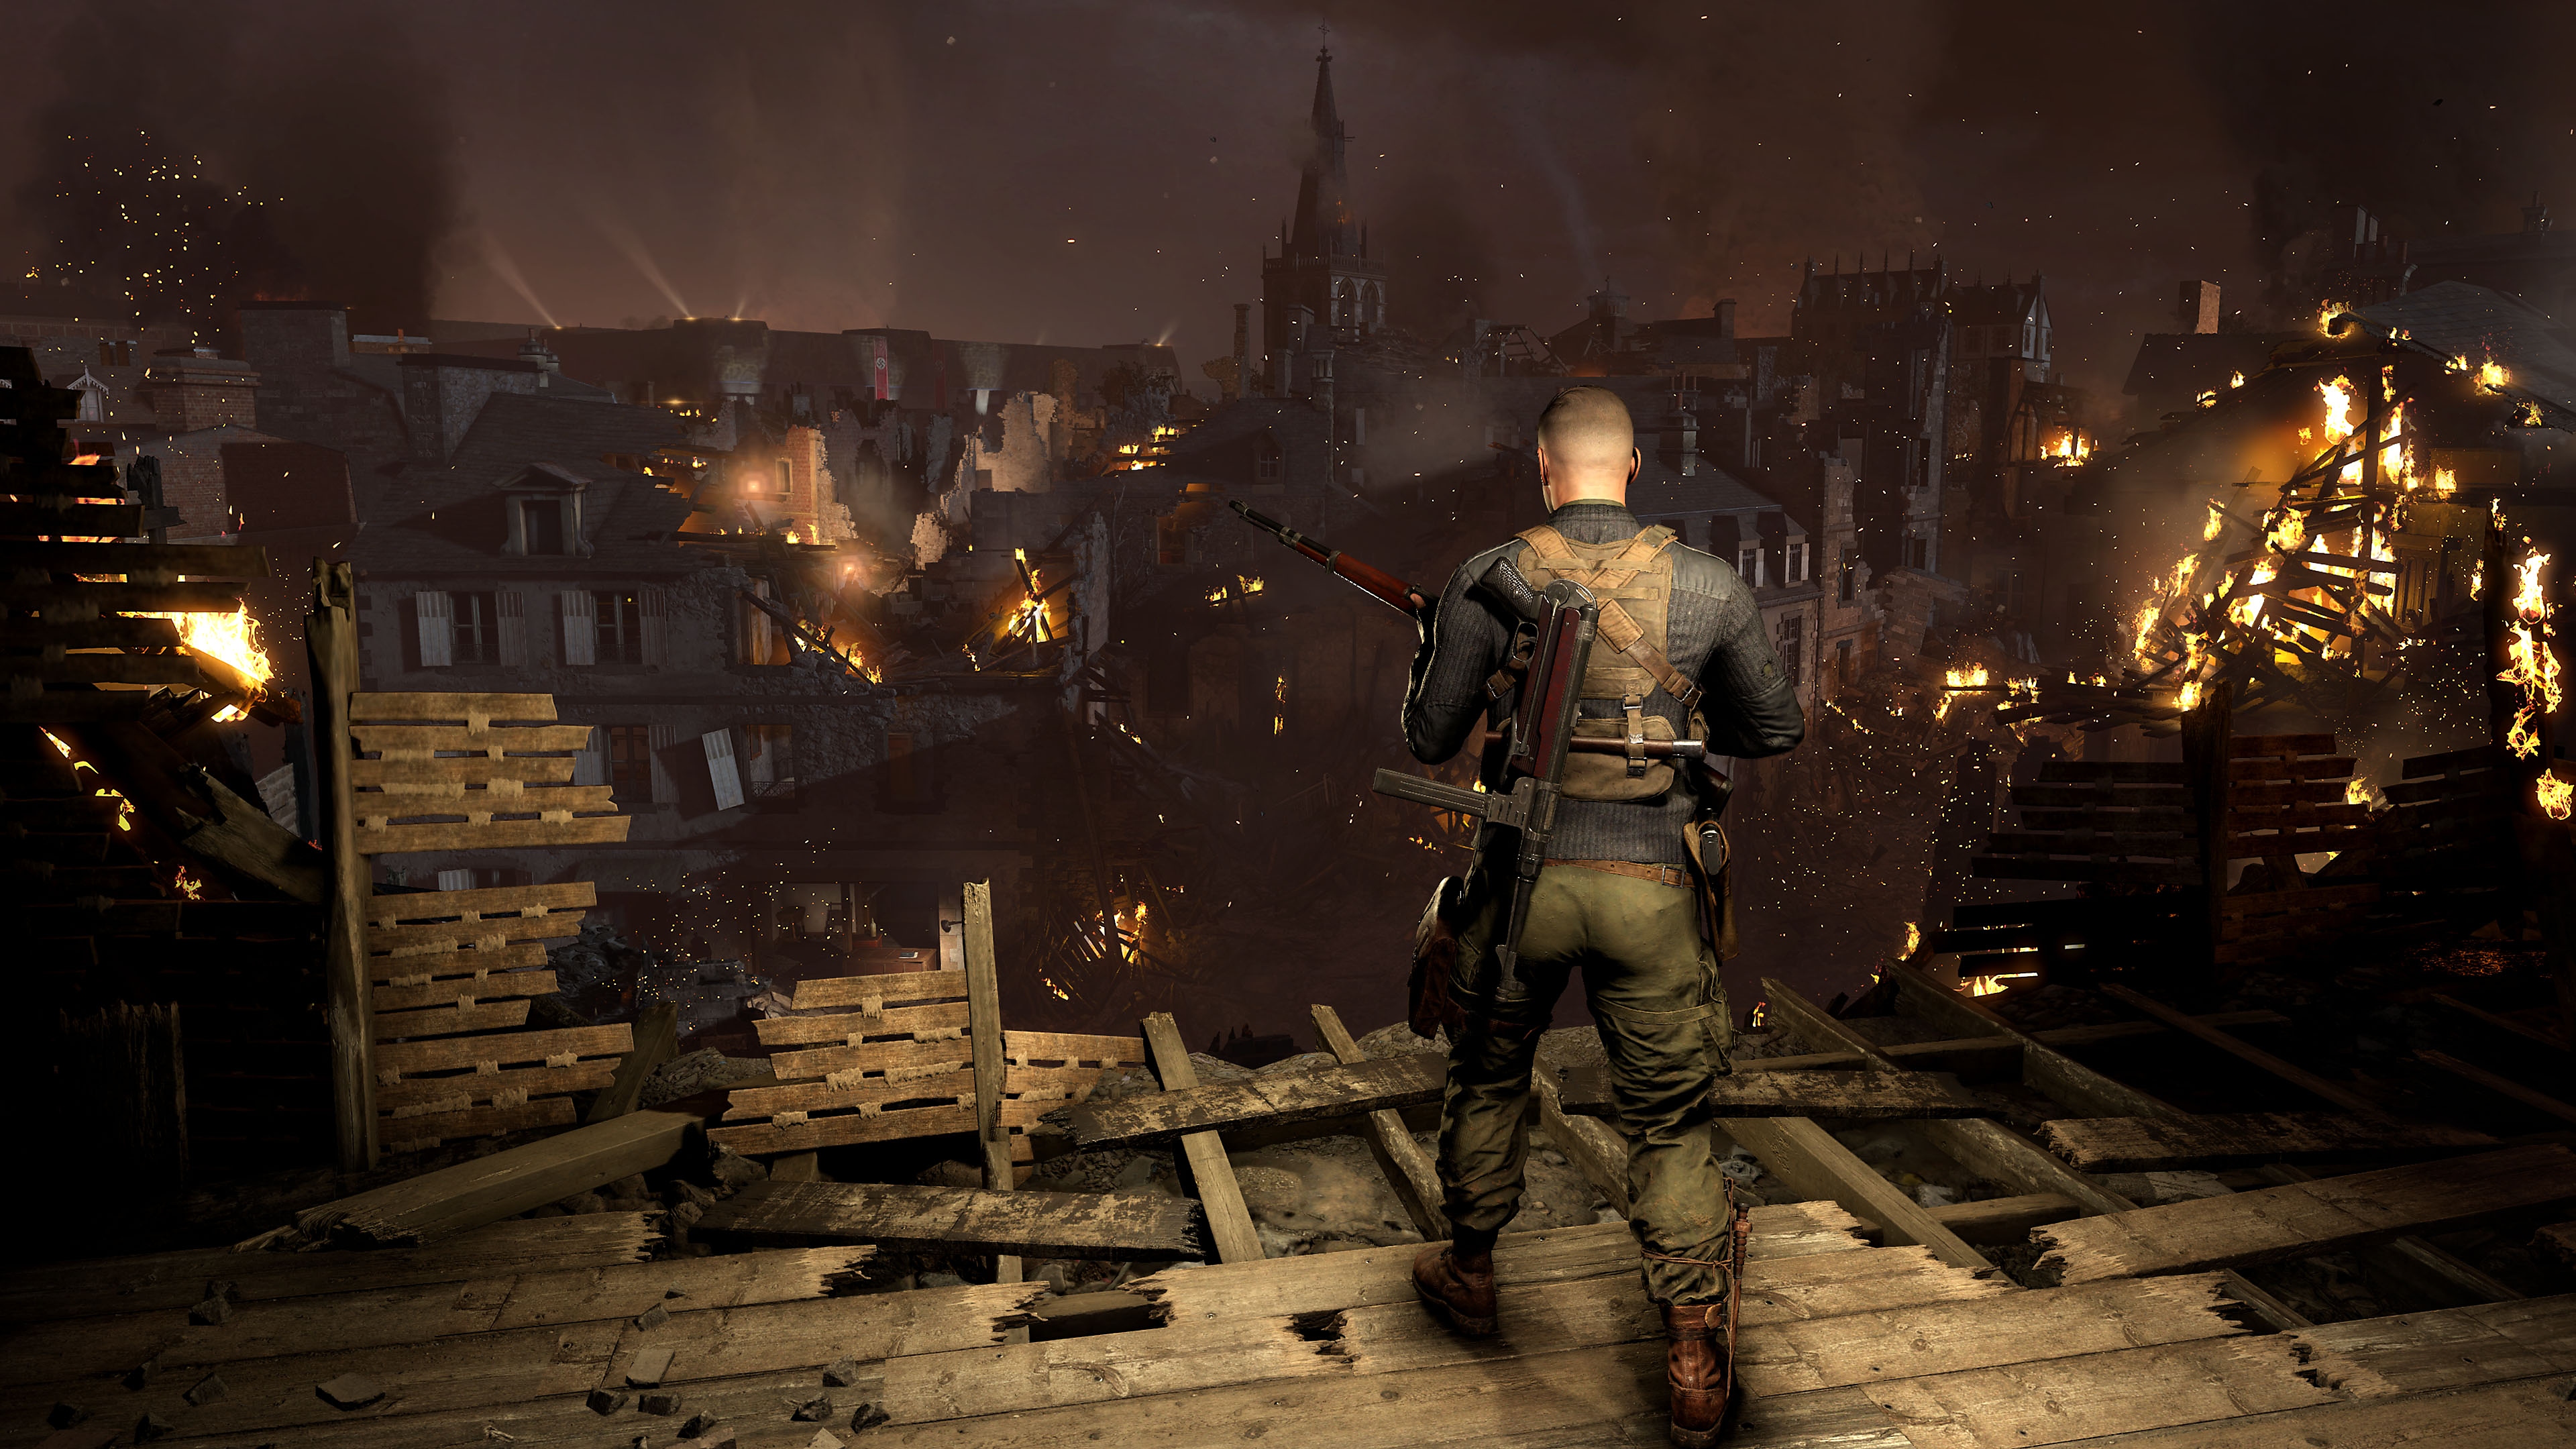 Sniper Elite 5 screenshot showing a character looking out over a town with buildings on fire